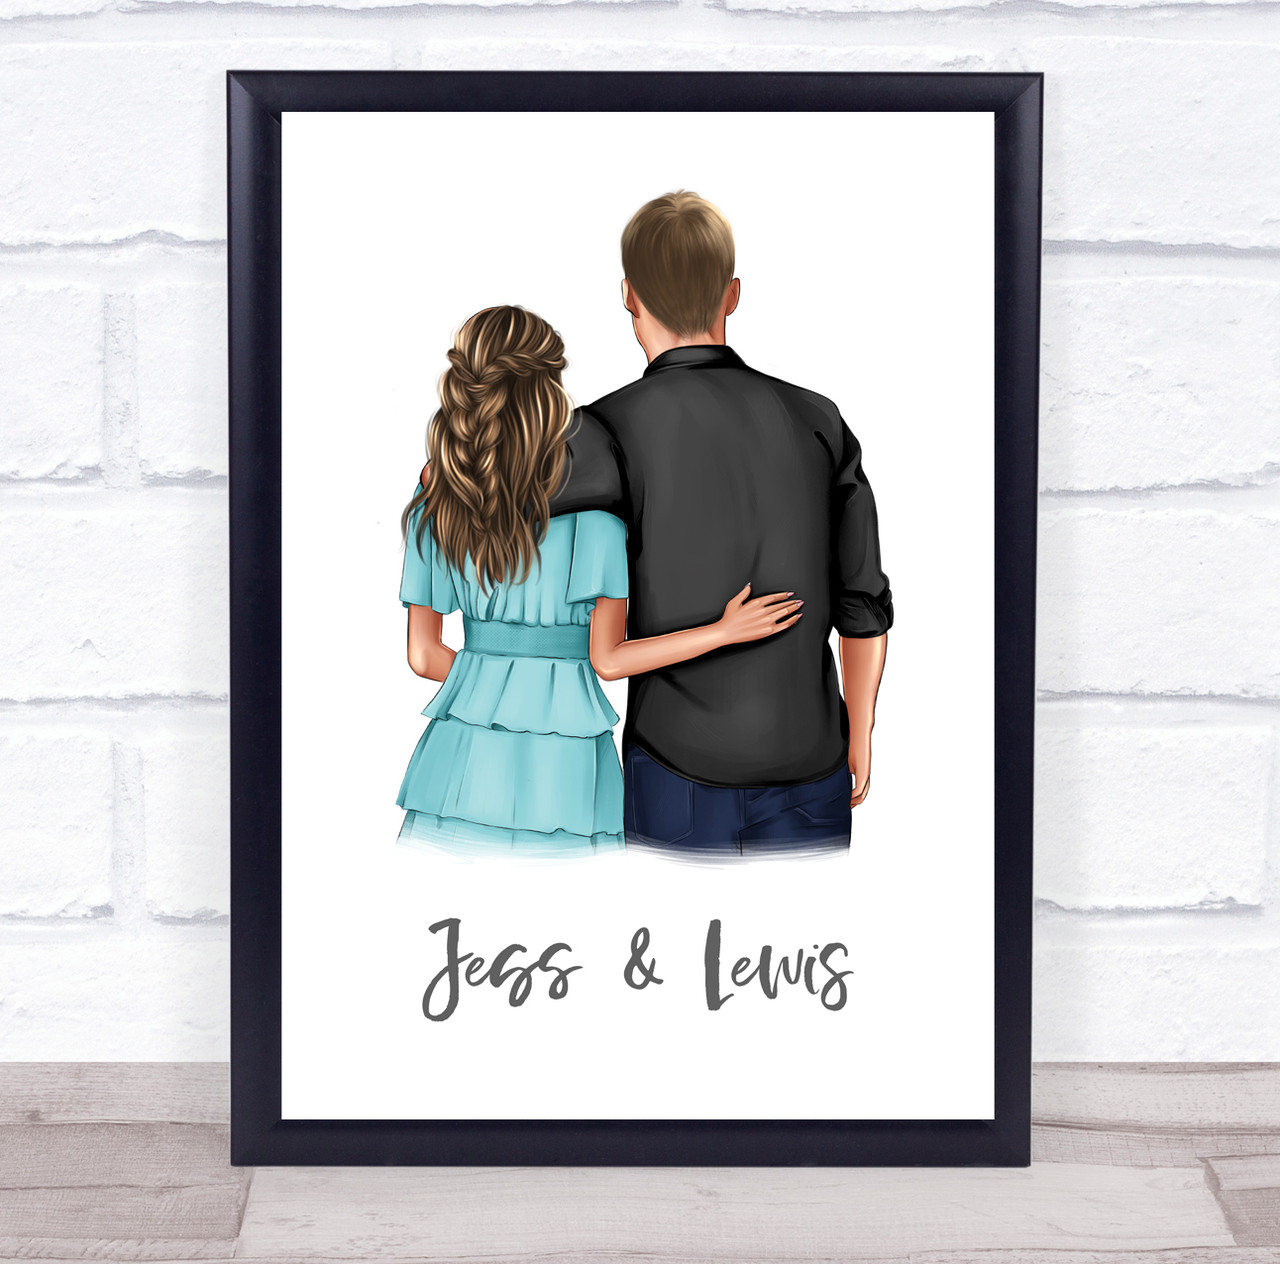 Buy Hand Made Wedding Gift, Art, Anniversary Gift, Couples Gift, Wife Gift,  Husband Gifts, Custom Signs, Art, made to order from Artistic Creations By  Rose